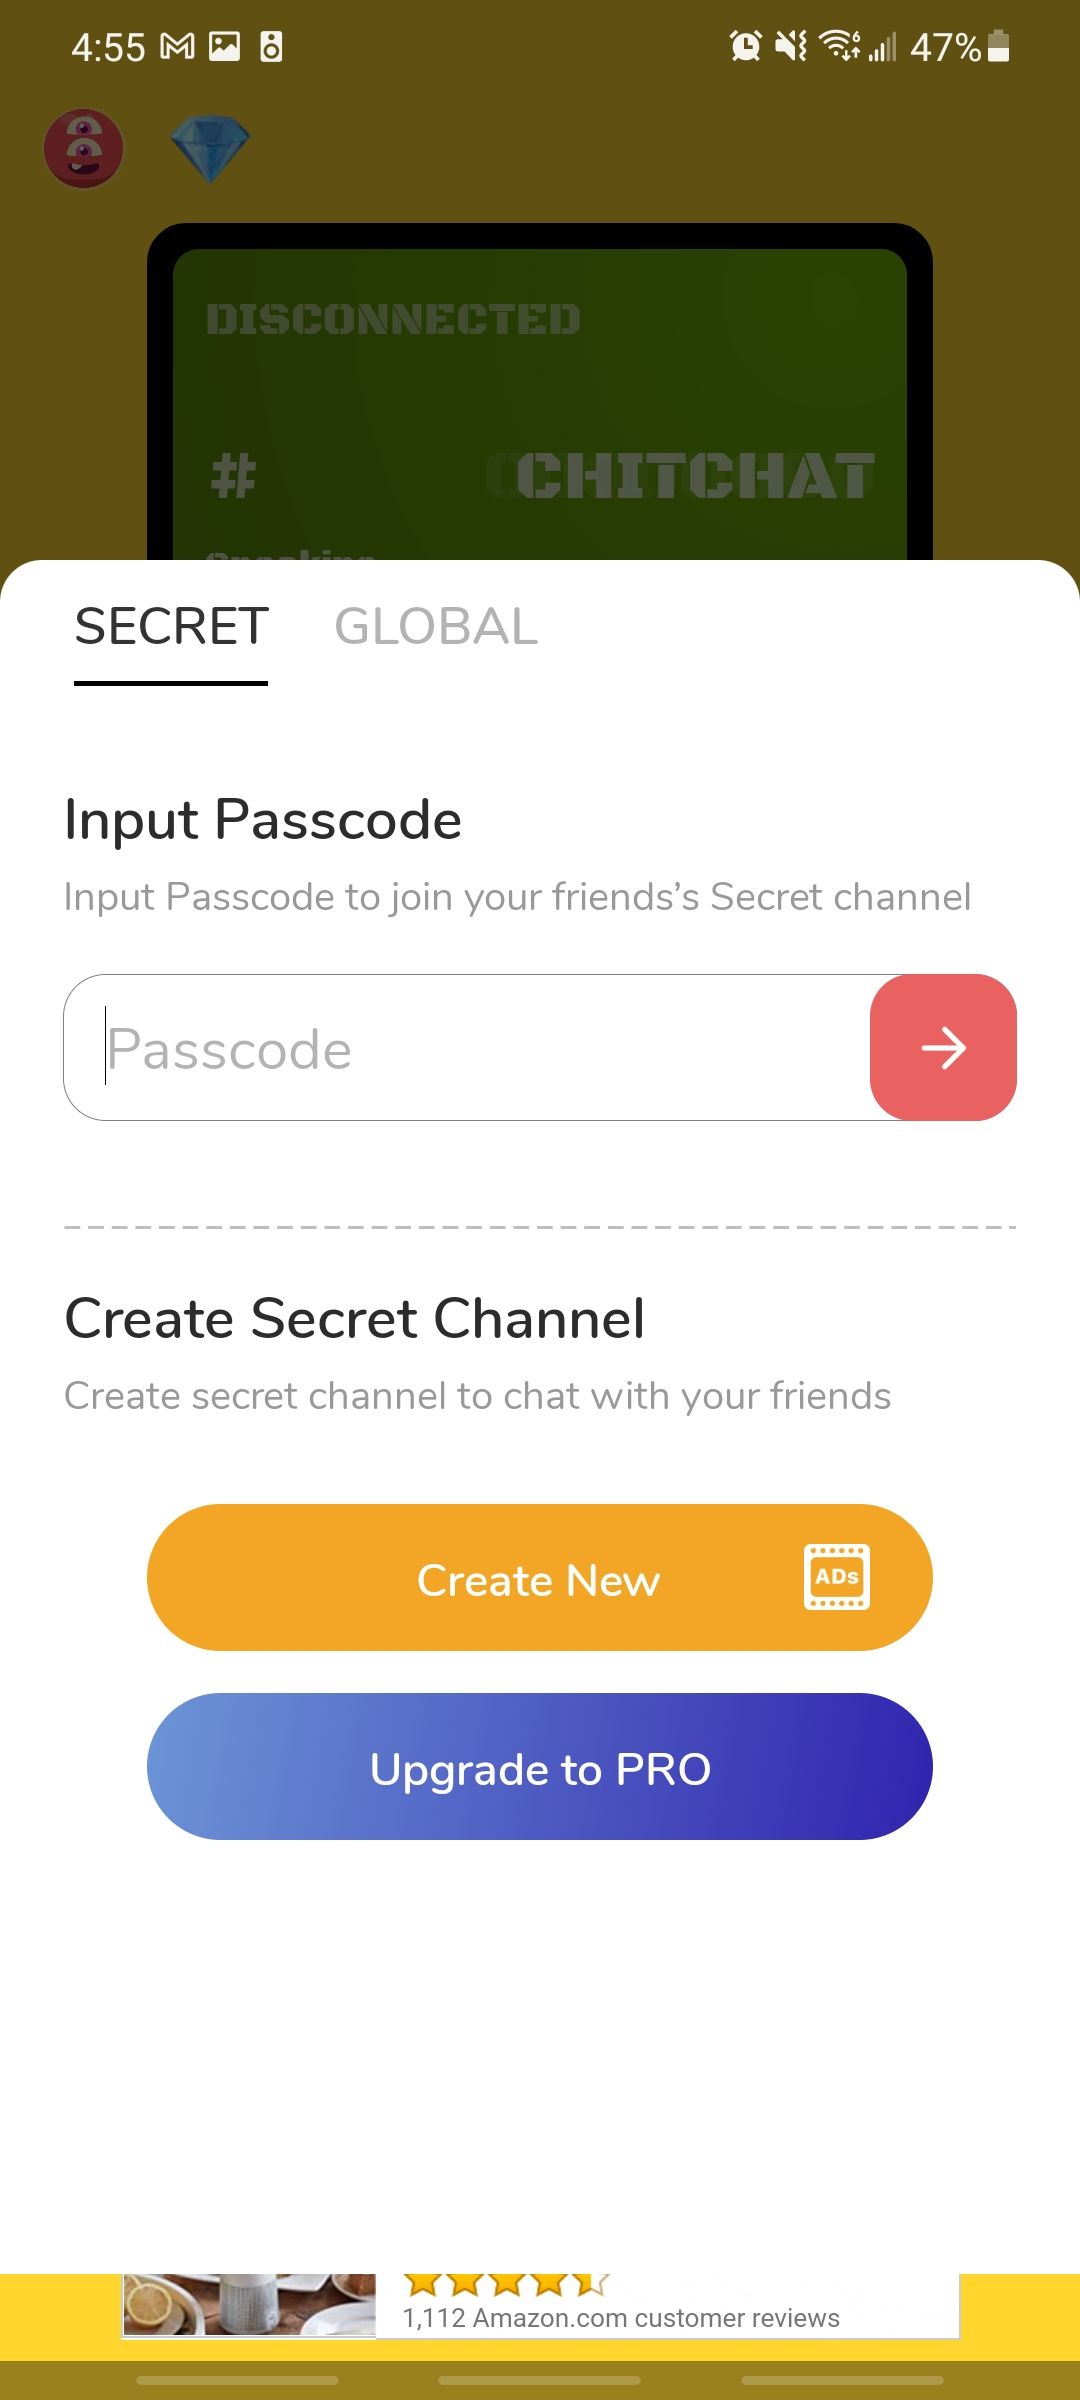 walkie talkie app showing how to set up a secret channel for your friends